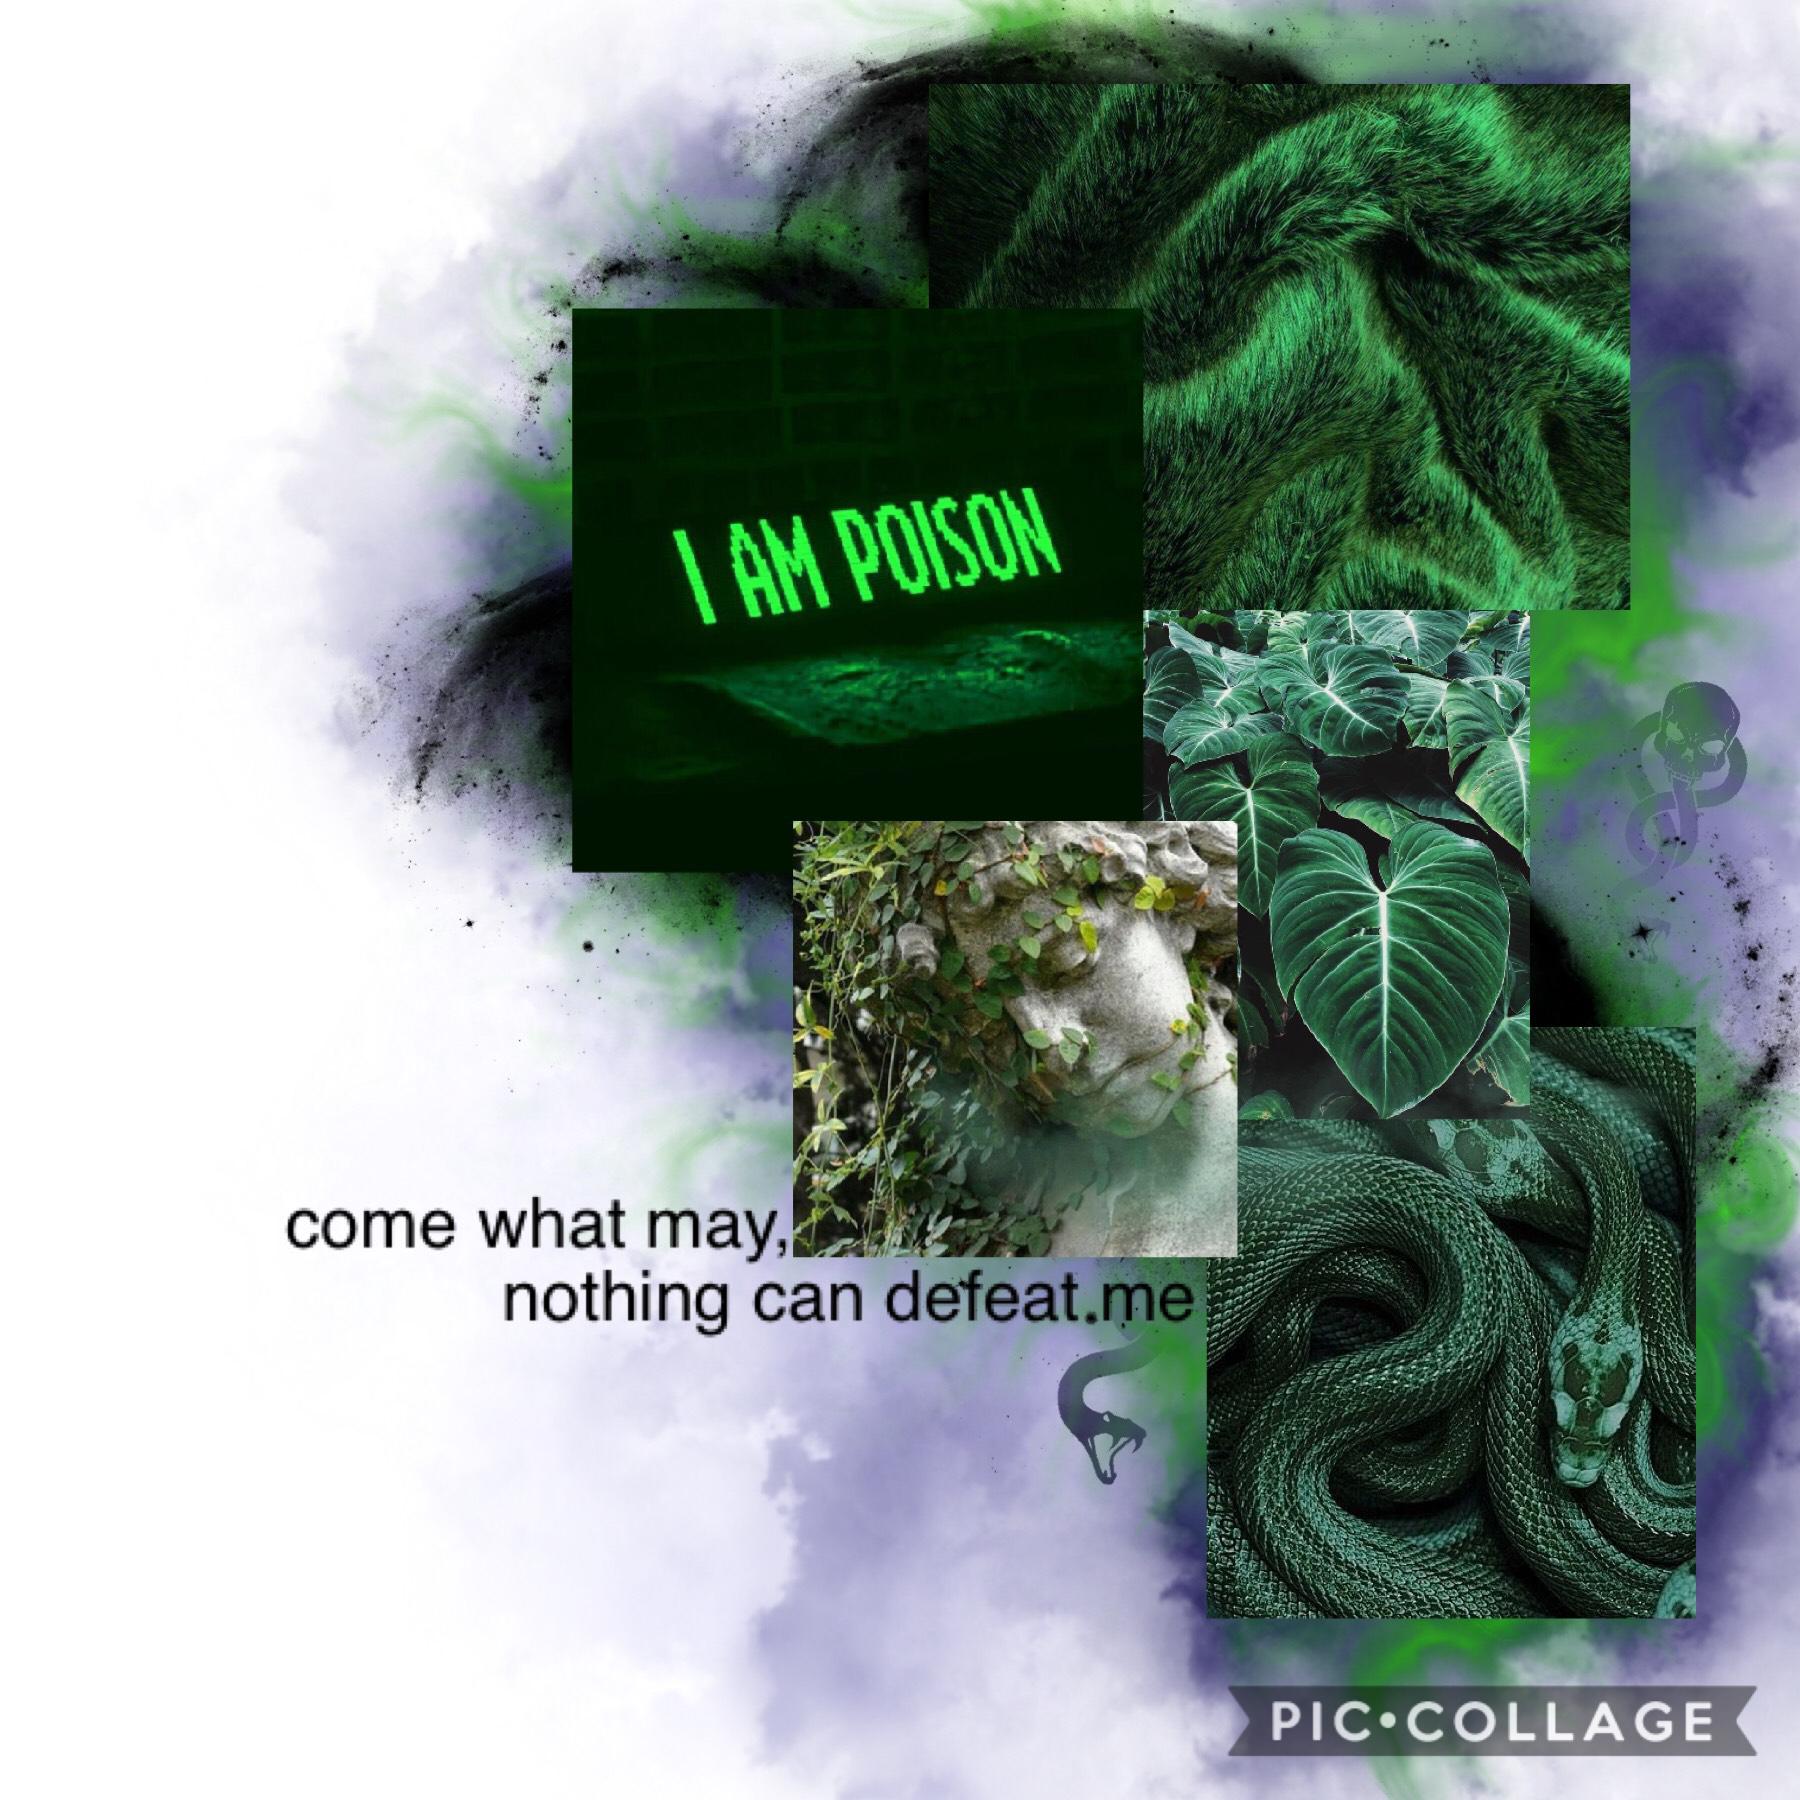 12/22/18
I know this isn’t very Christmasy, but then again I’m not in a very Christmasy mood. Slytherin inspired, snake themed collage. 💚🖤💚